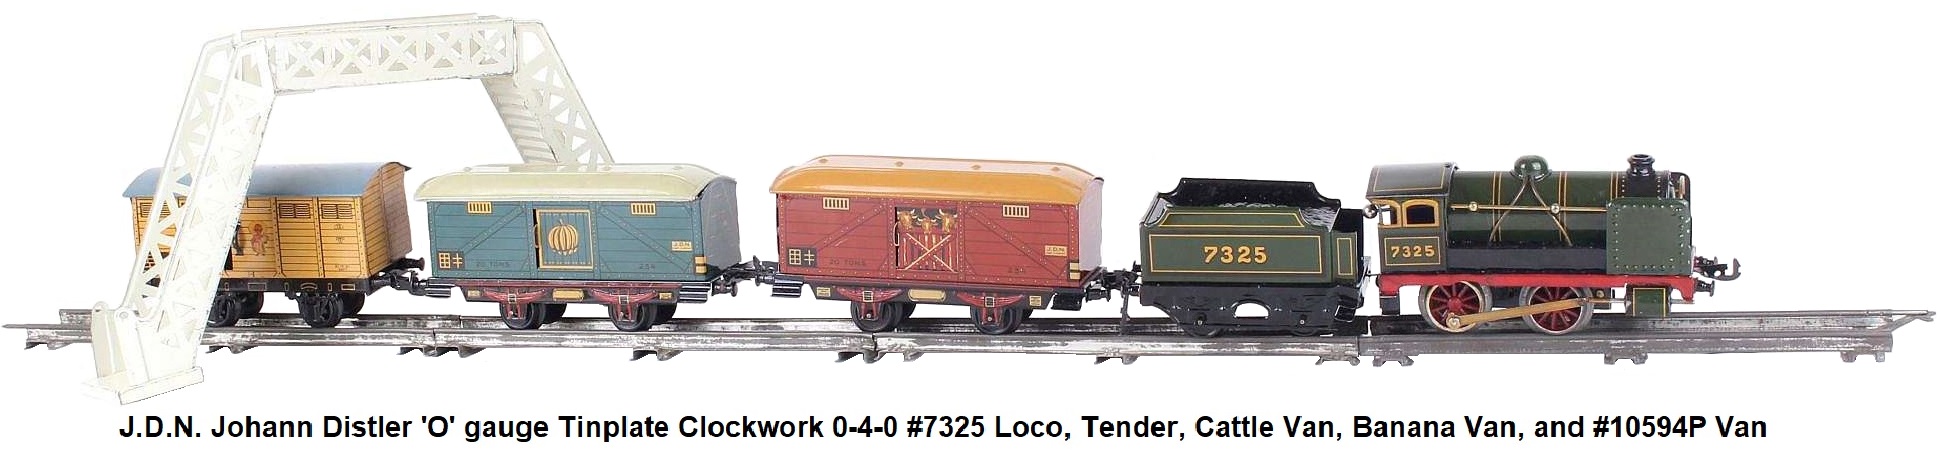 J.D.N. Johann Distler 'O' gauge tinplate lithographed clockwork freight train set with #7325 steam outline locomotive and tender, two distinctive freight wagons, one with bananas, one with three cows, and a third wagon #10594P depicting a Mexican holding bananas